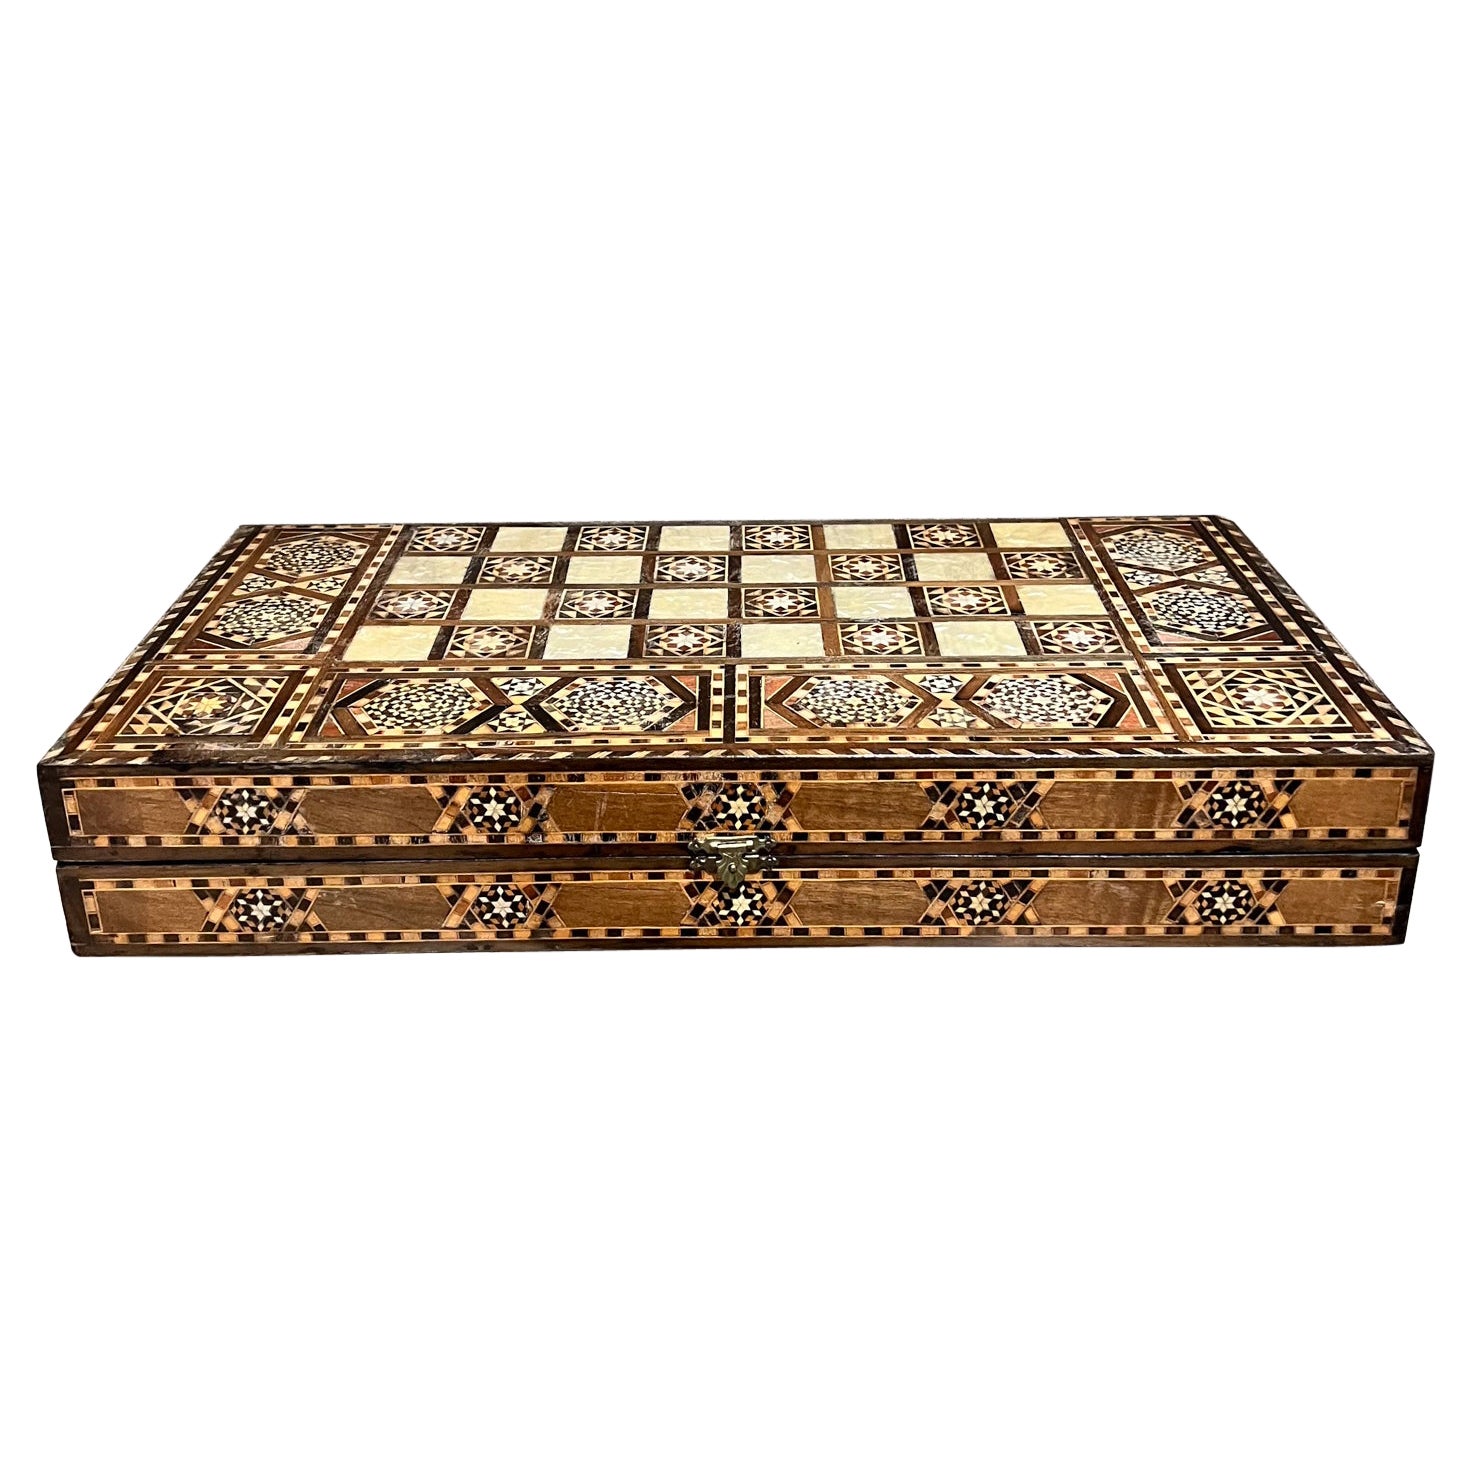 1960s Middle Eastern Backgammon Game Board Chess Box  For Sale